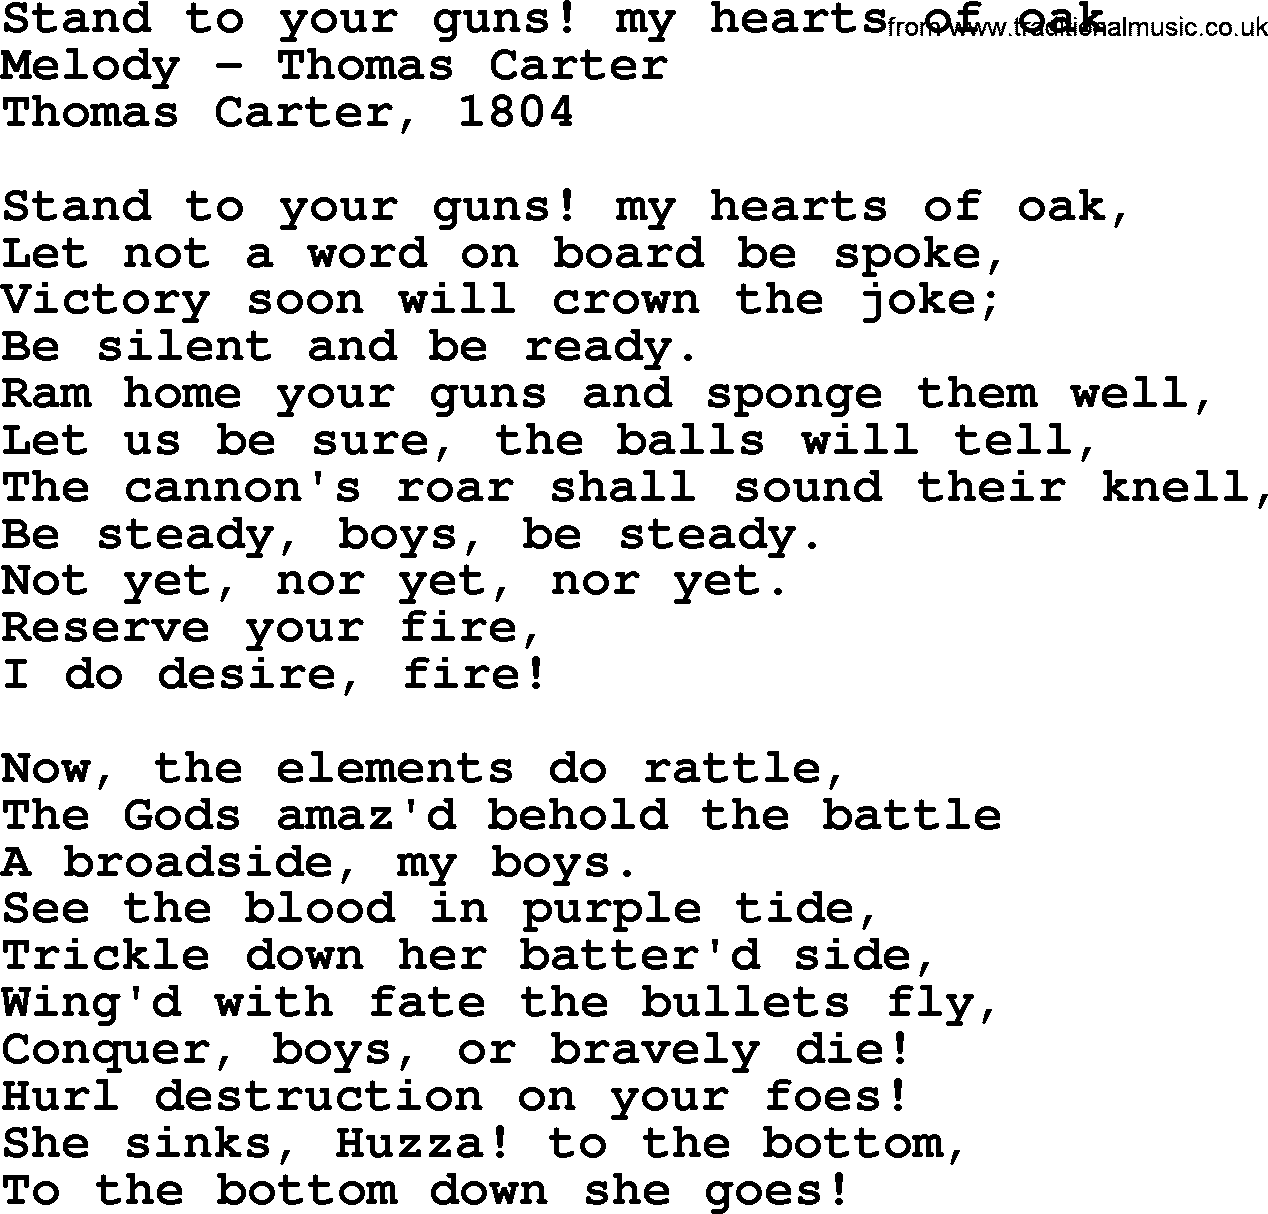 Sea Song or Shantie: Stand To Your Guns My Hearts Of Oak, lyrics